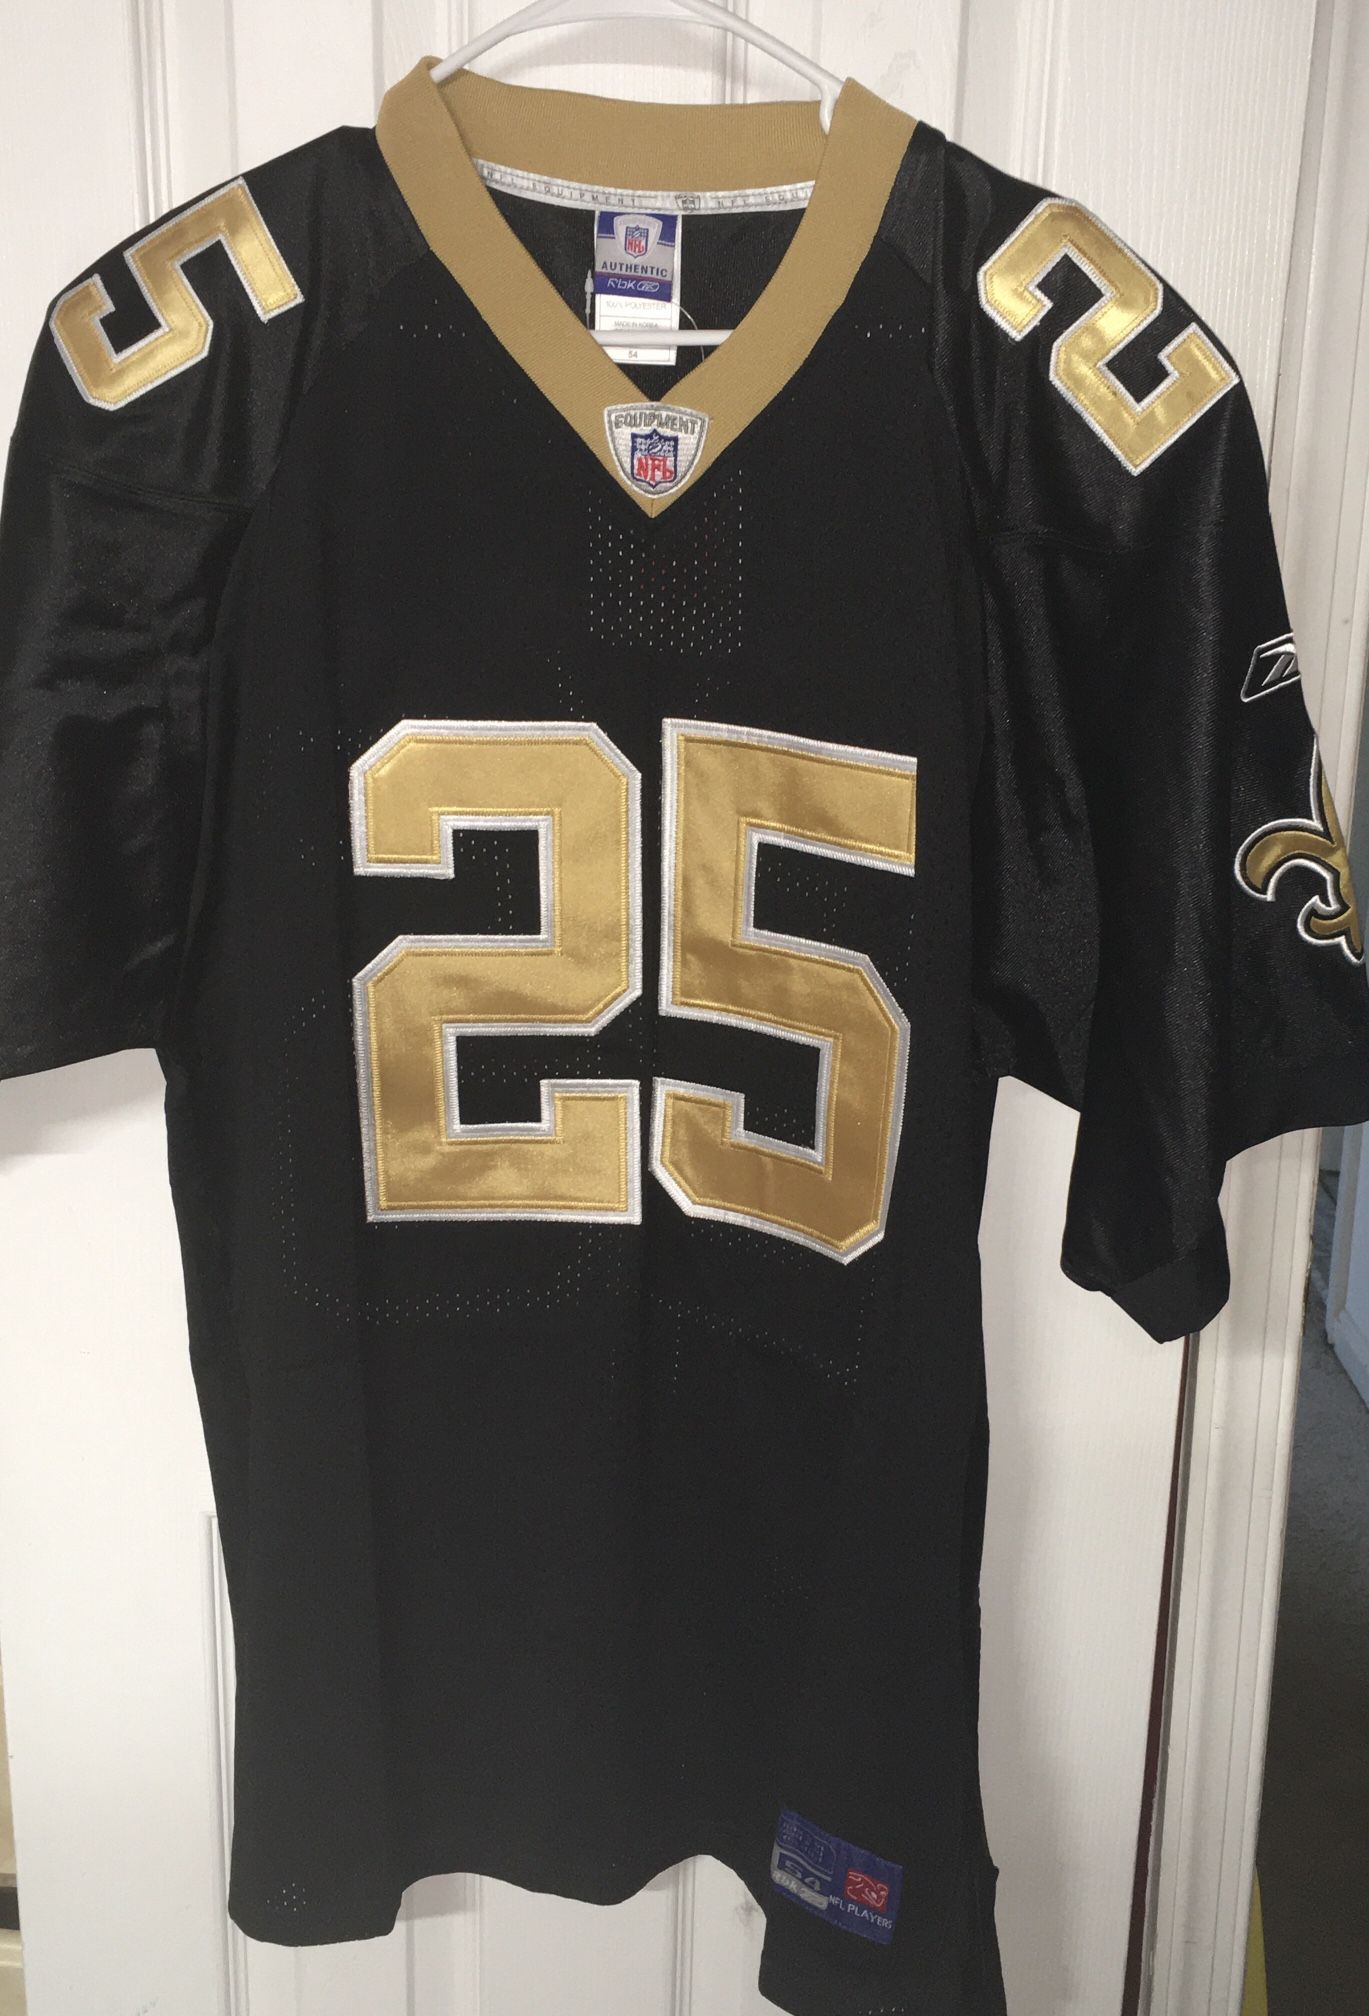 New Orleans Saints Reggie Bush 3XL Jersey Stitched Size 54 New with tags - Reebok Please see photos Size 54 is 2X/3X - 27" arm pit to arm pit